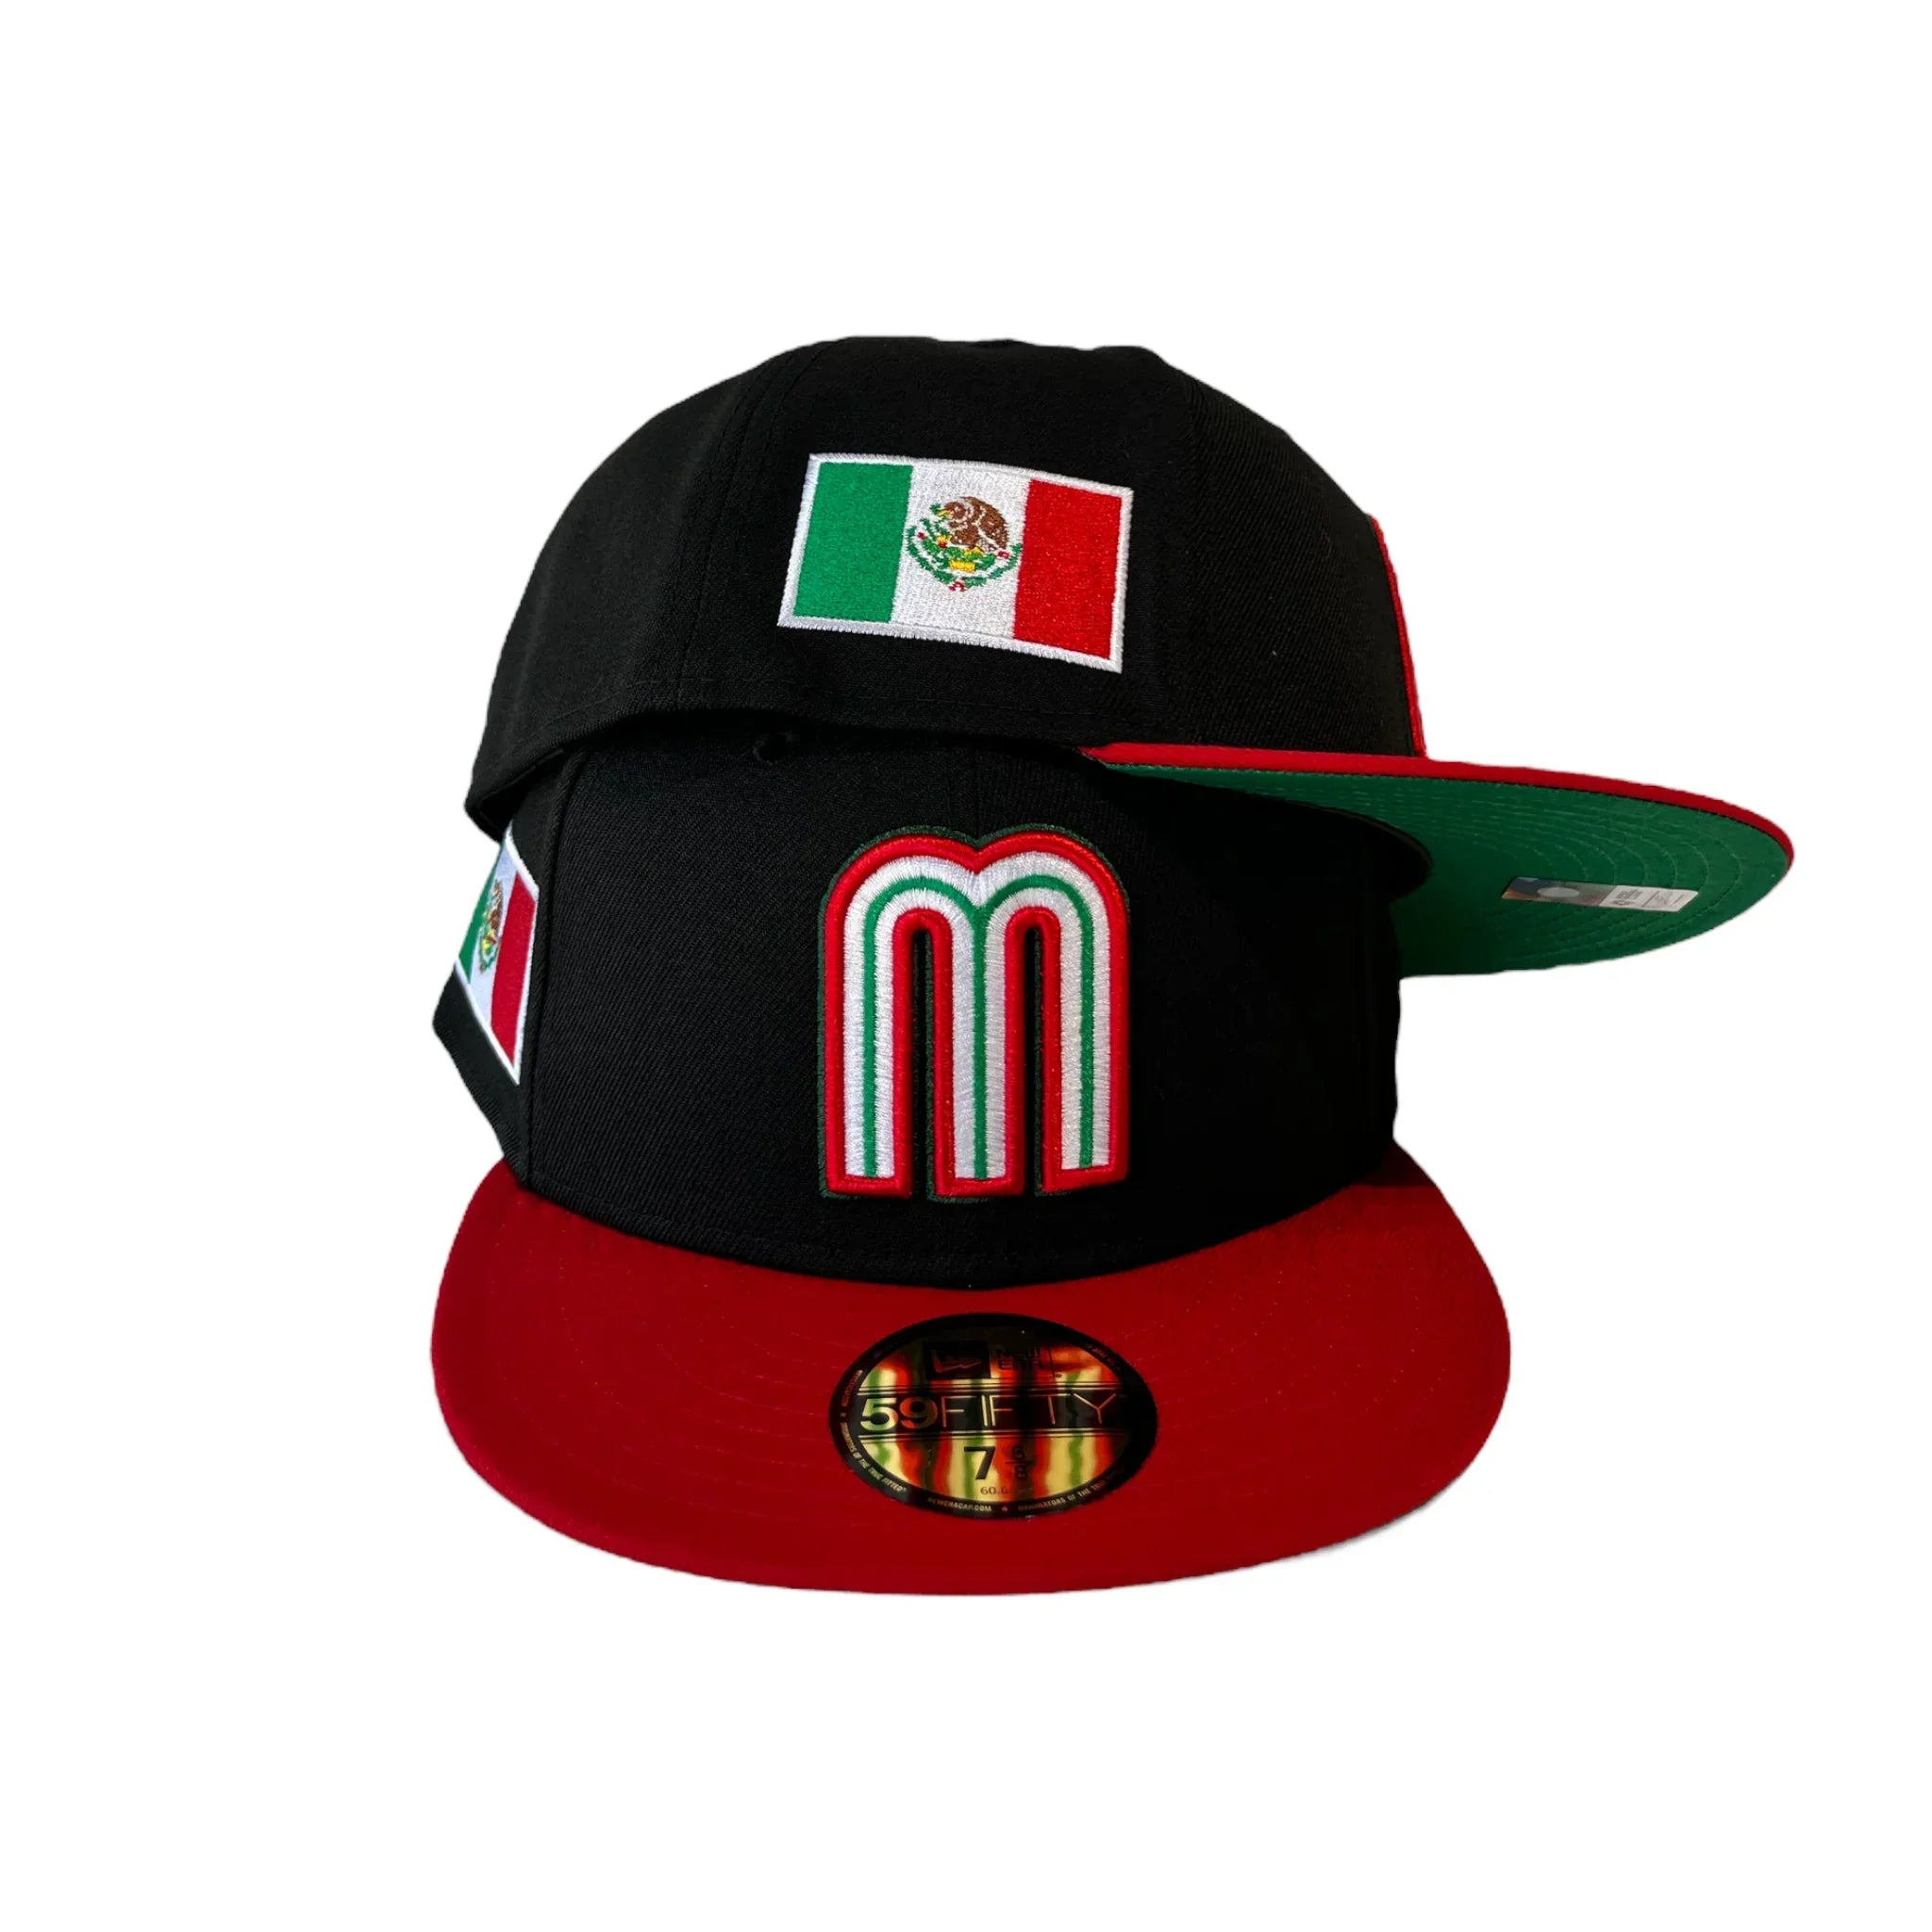 New Era 59FIFTY World Baseball Classic Mexico Fitted Hat Khaki Green Red